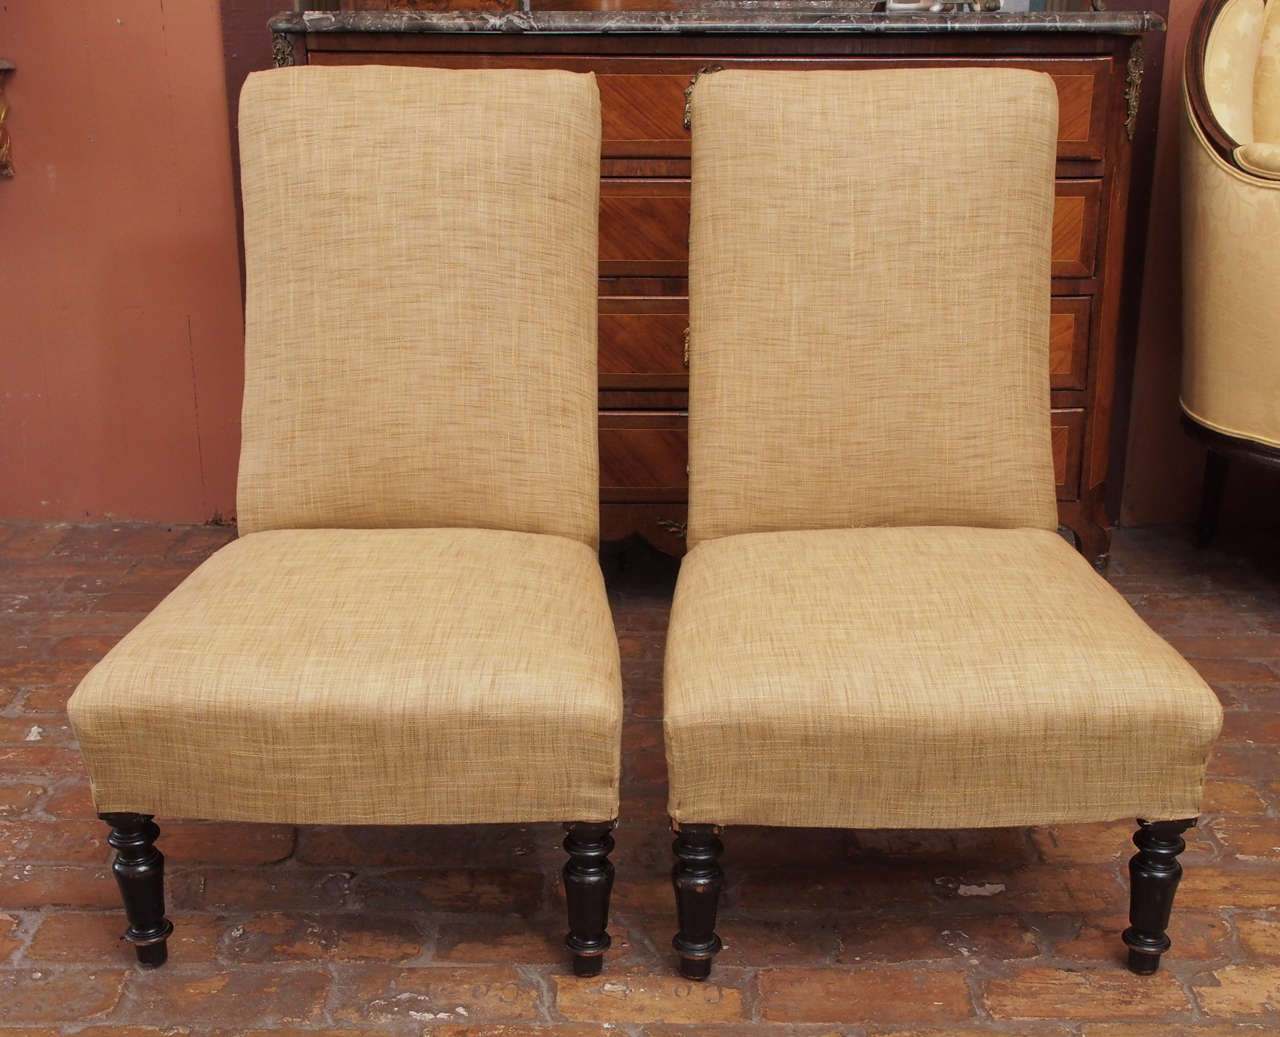 Pair of 19th century French Napoleon III period upholstered 